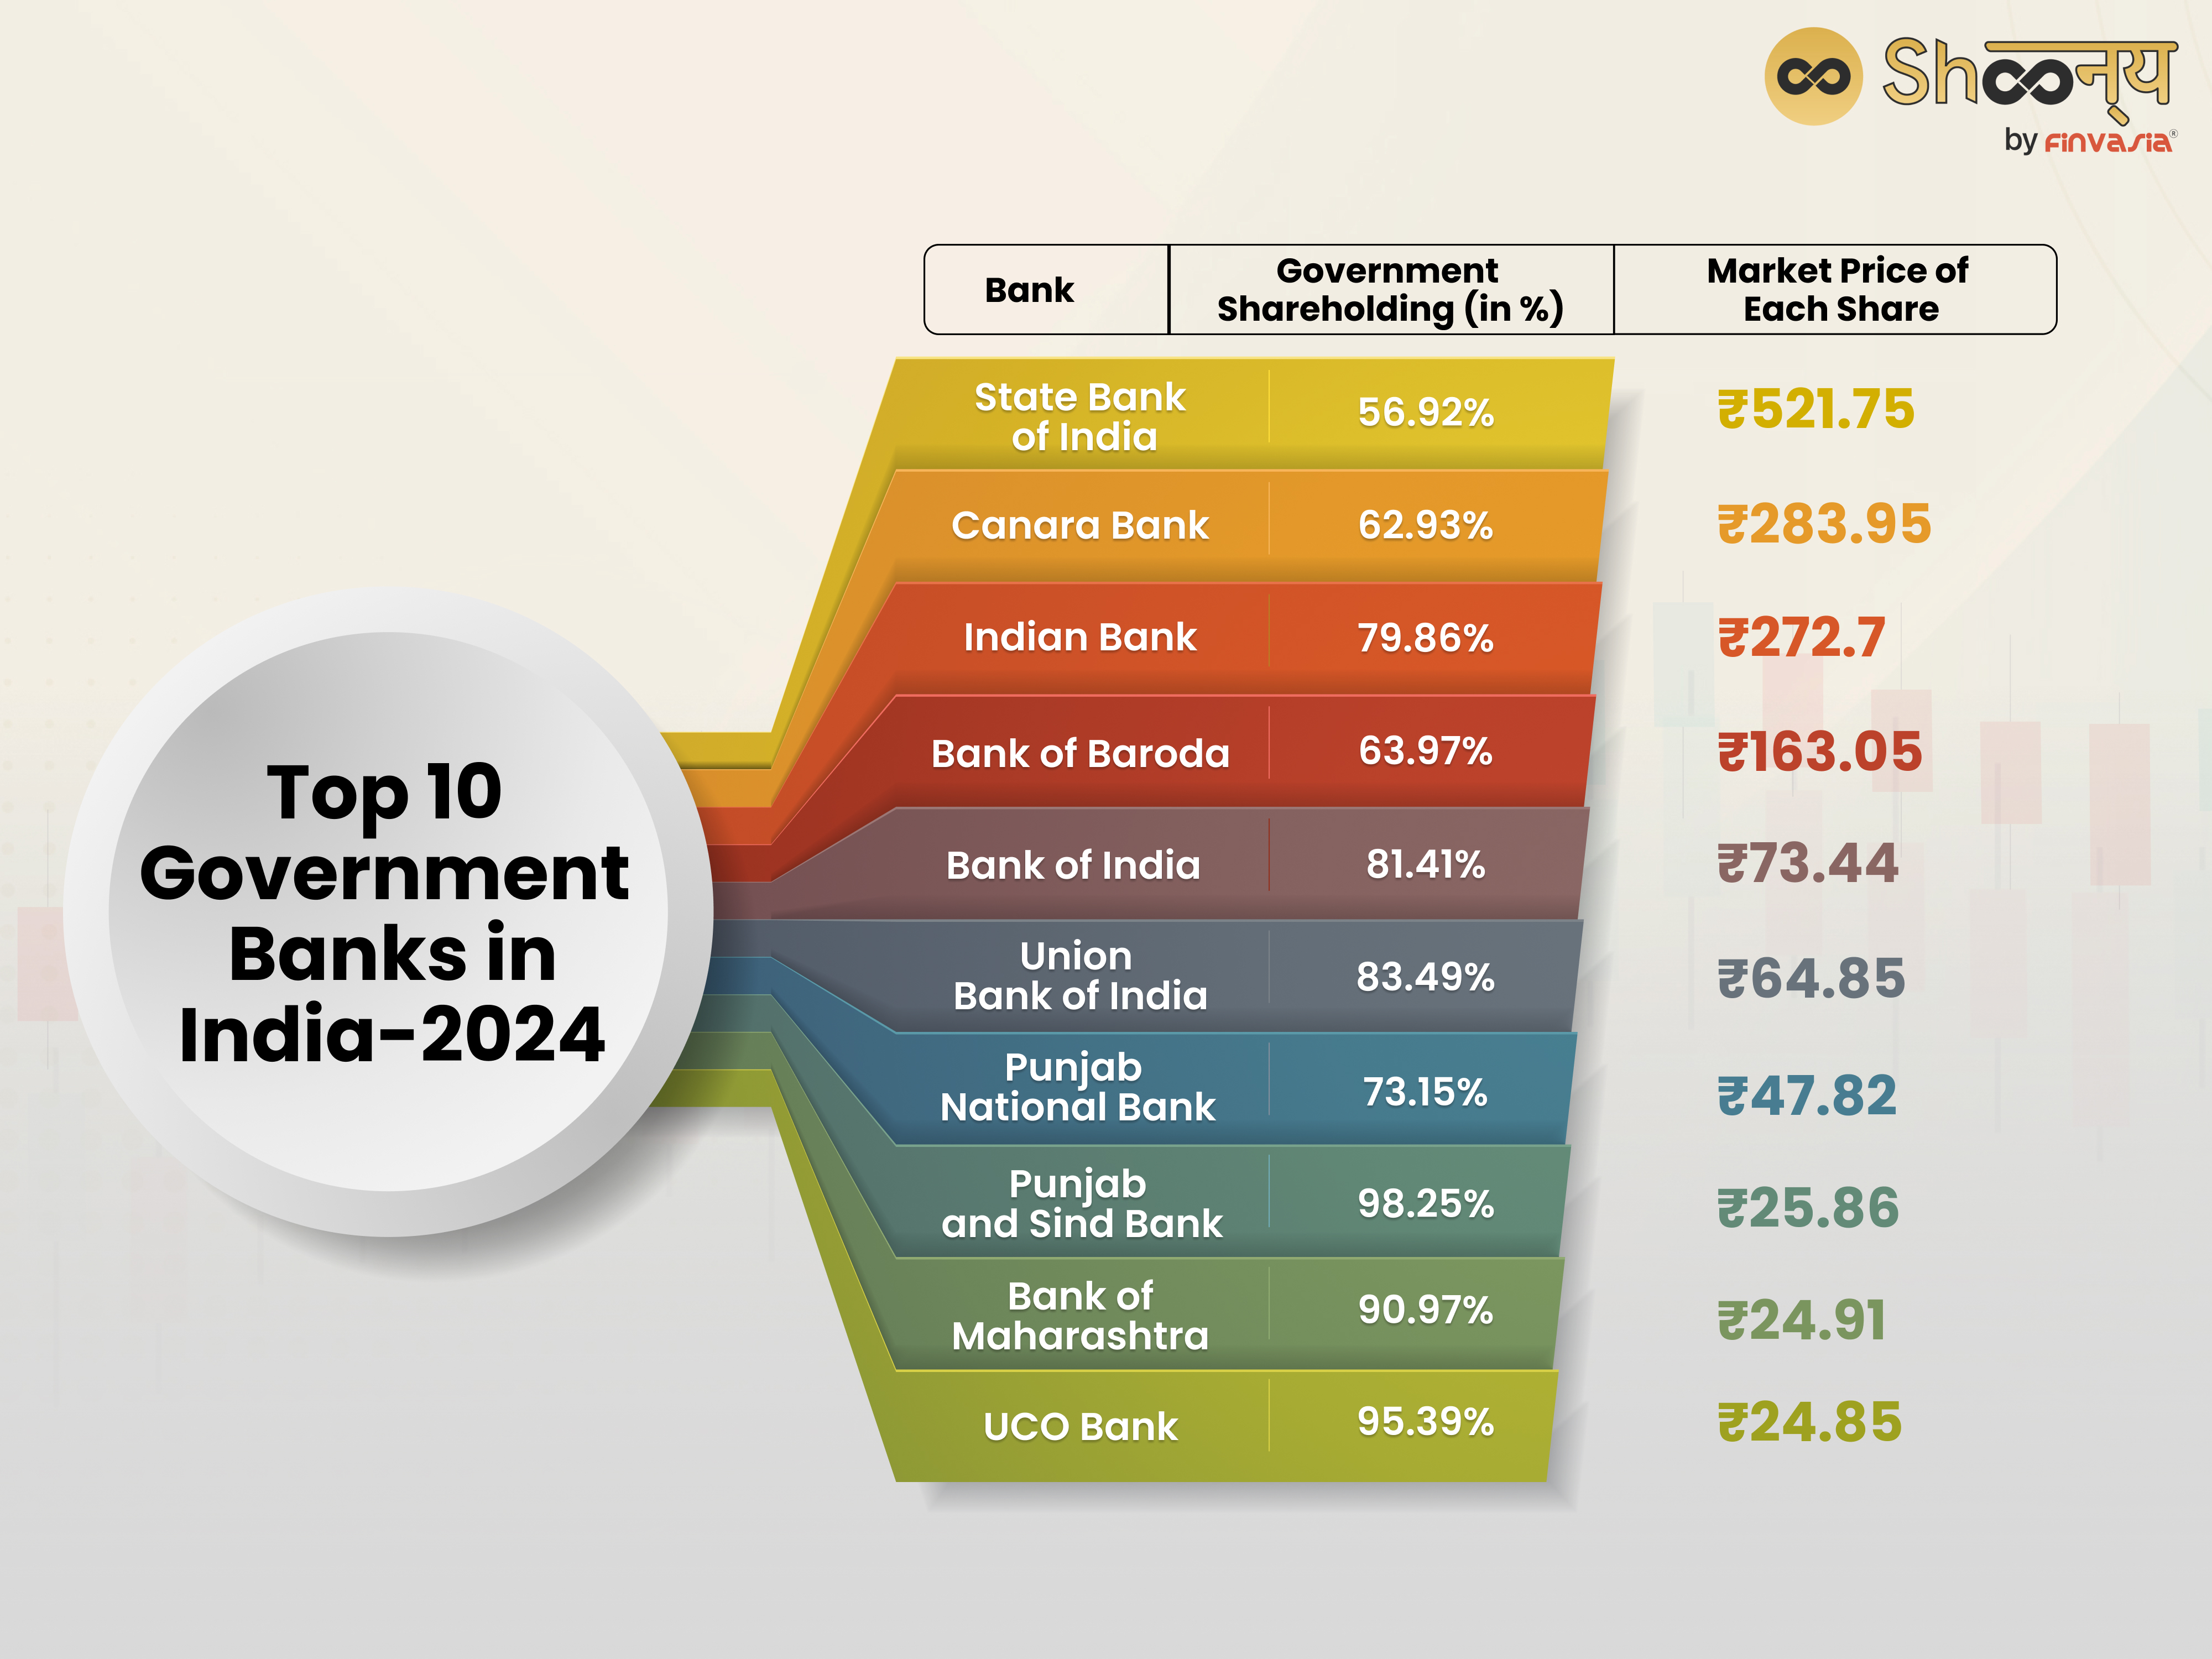 List of Top 10 Government Banks in India 2024